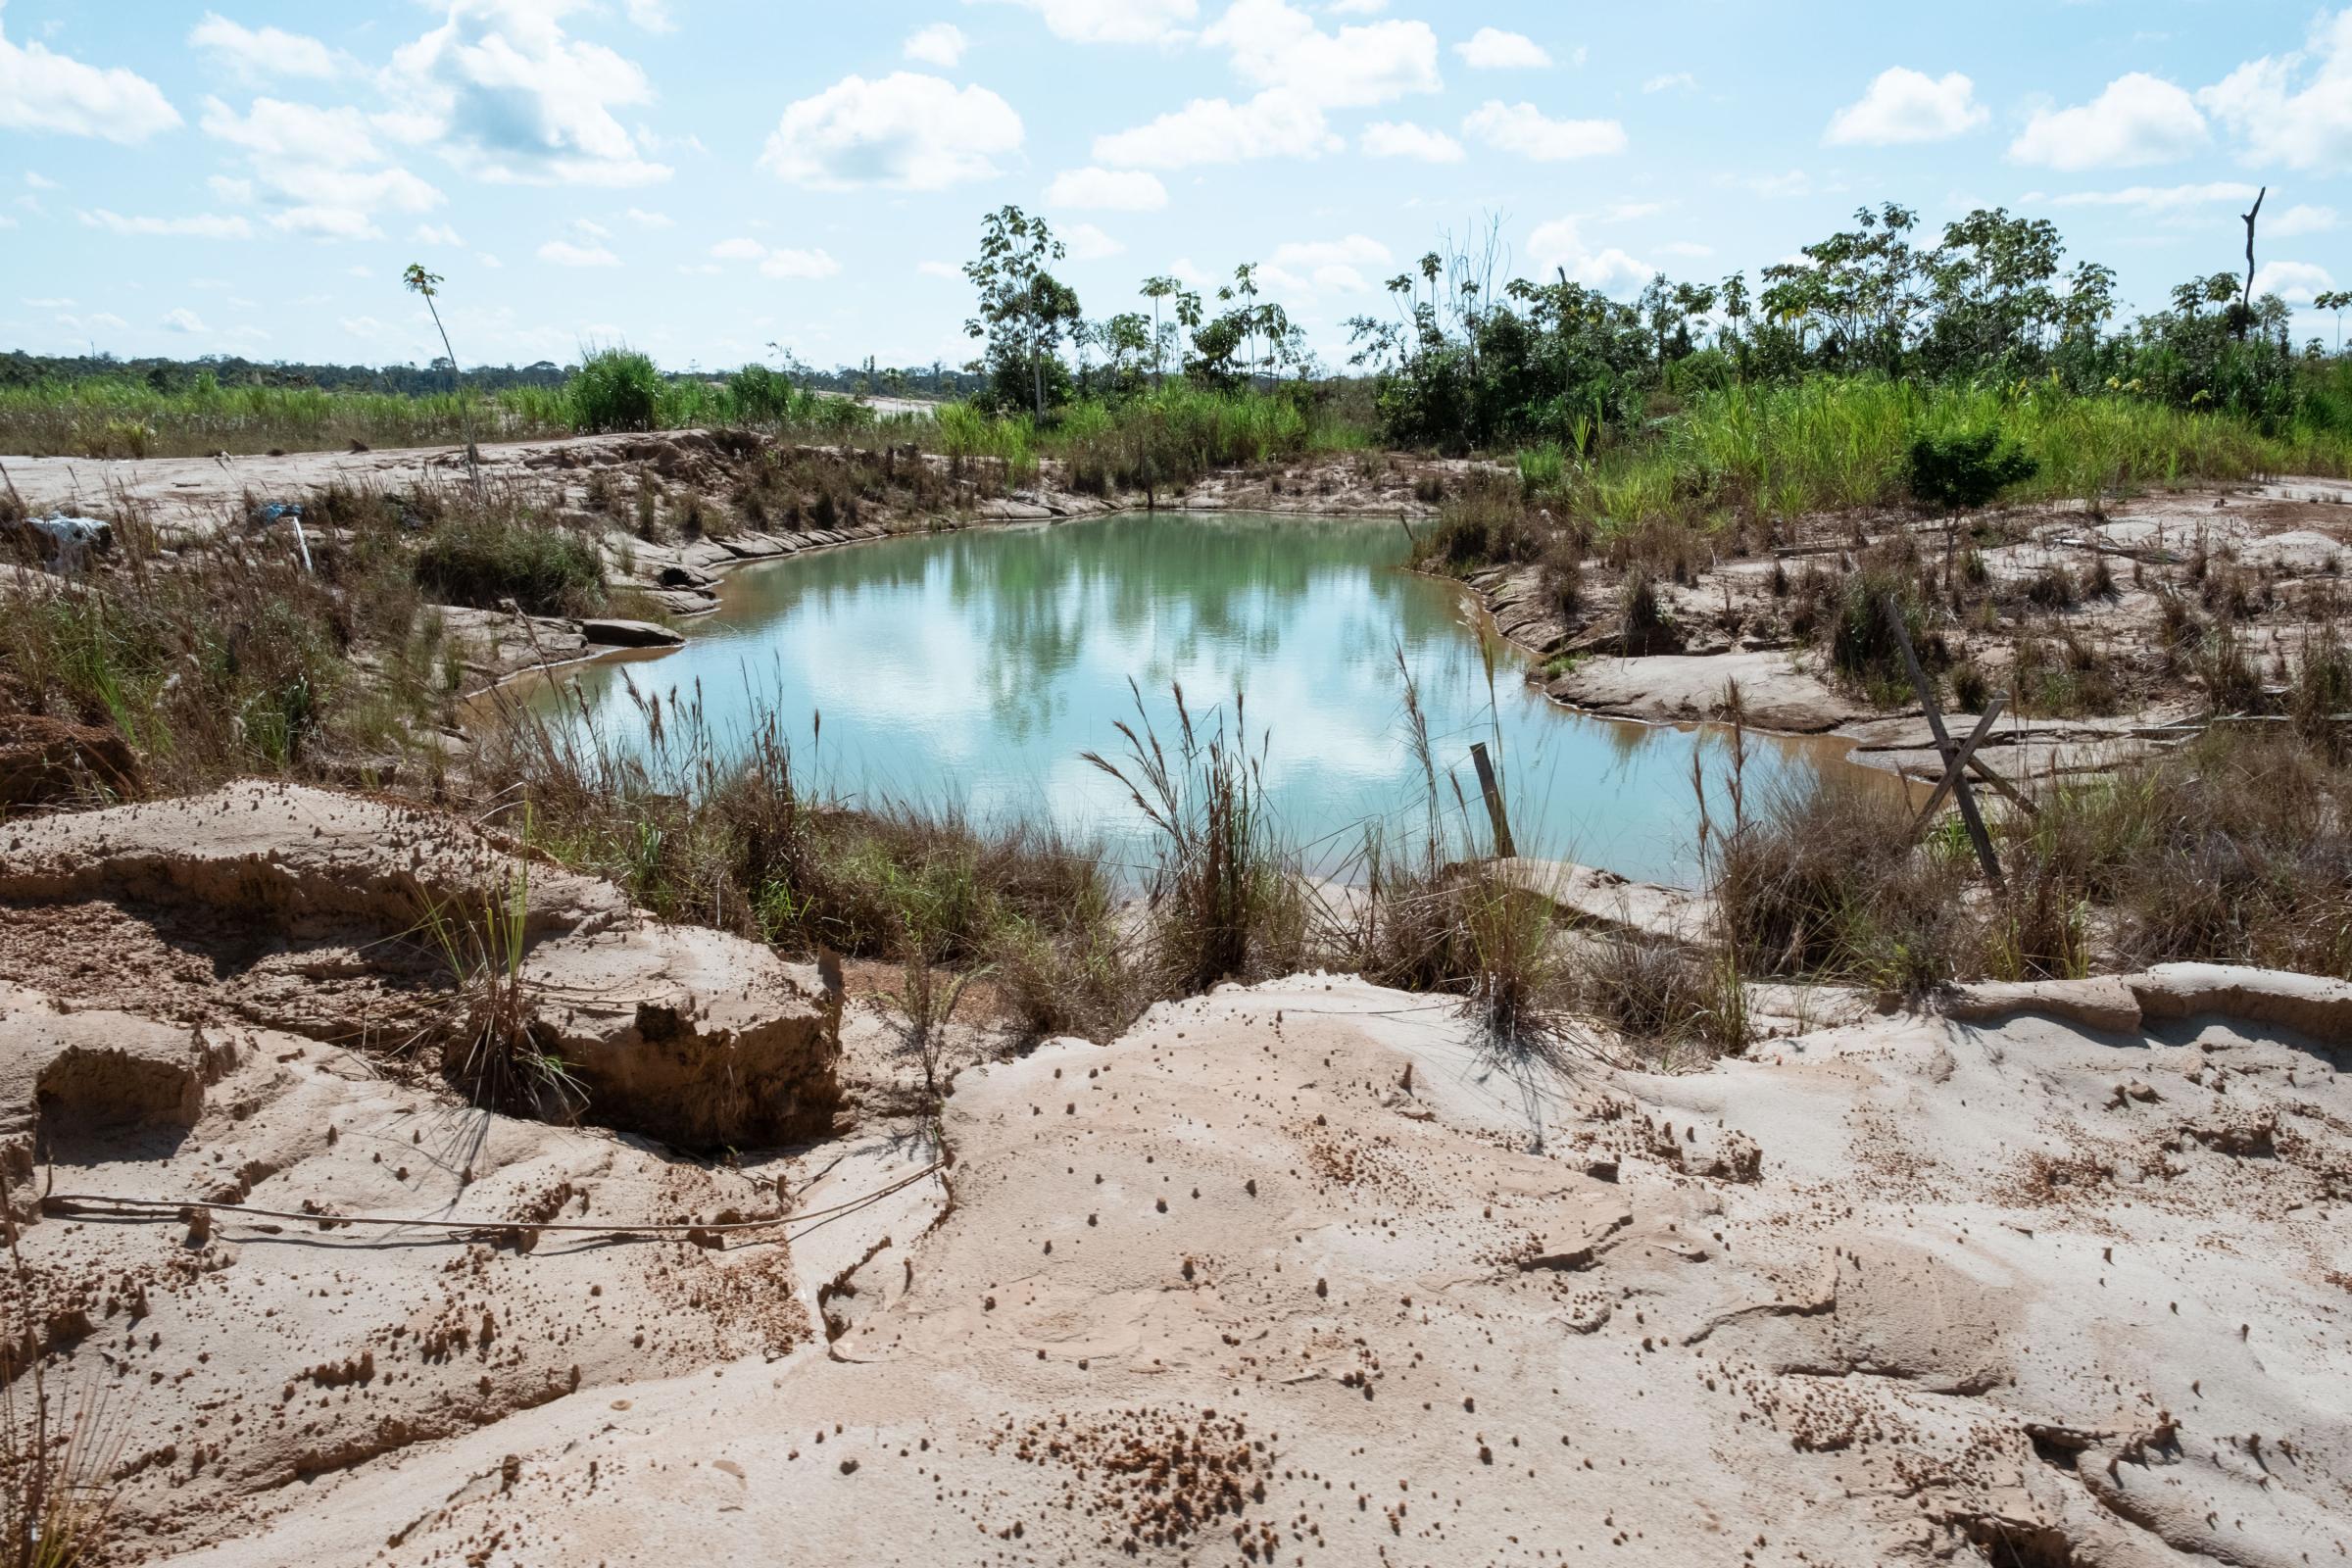 Illegal Gold Mining in La Pampa - An estimated 150,000 hectares of forest has been...